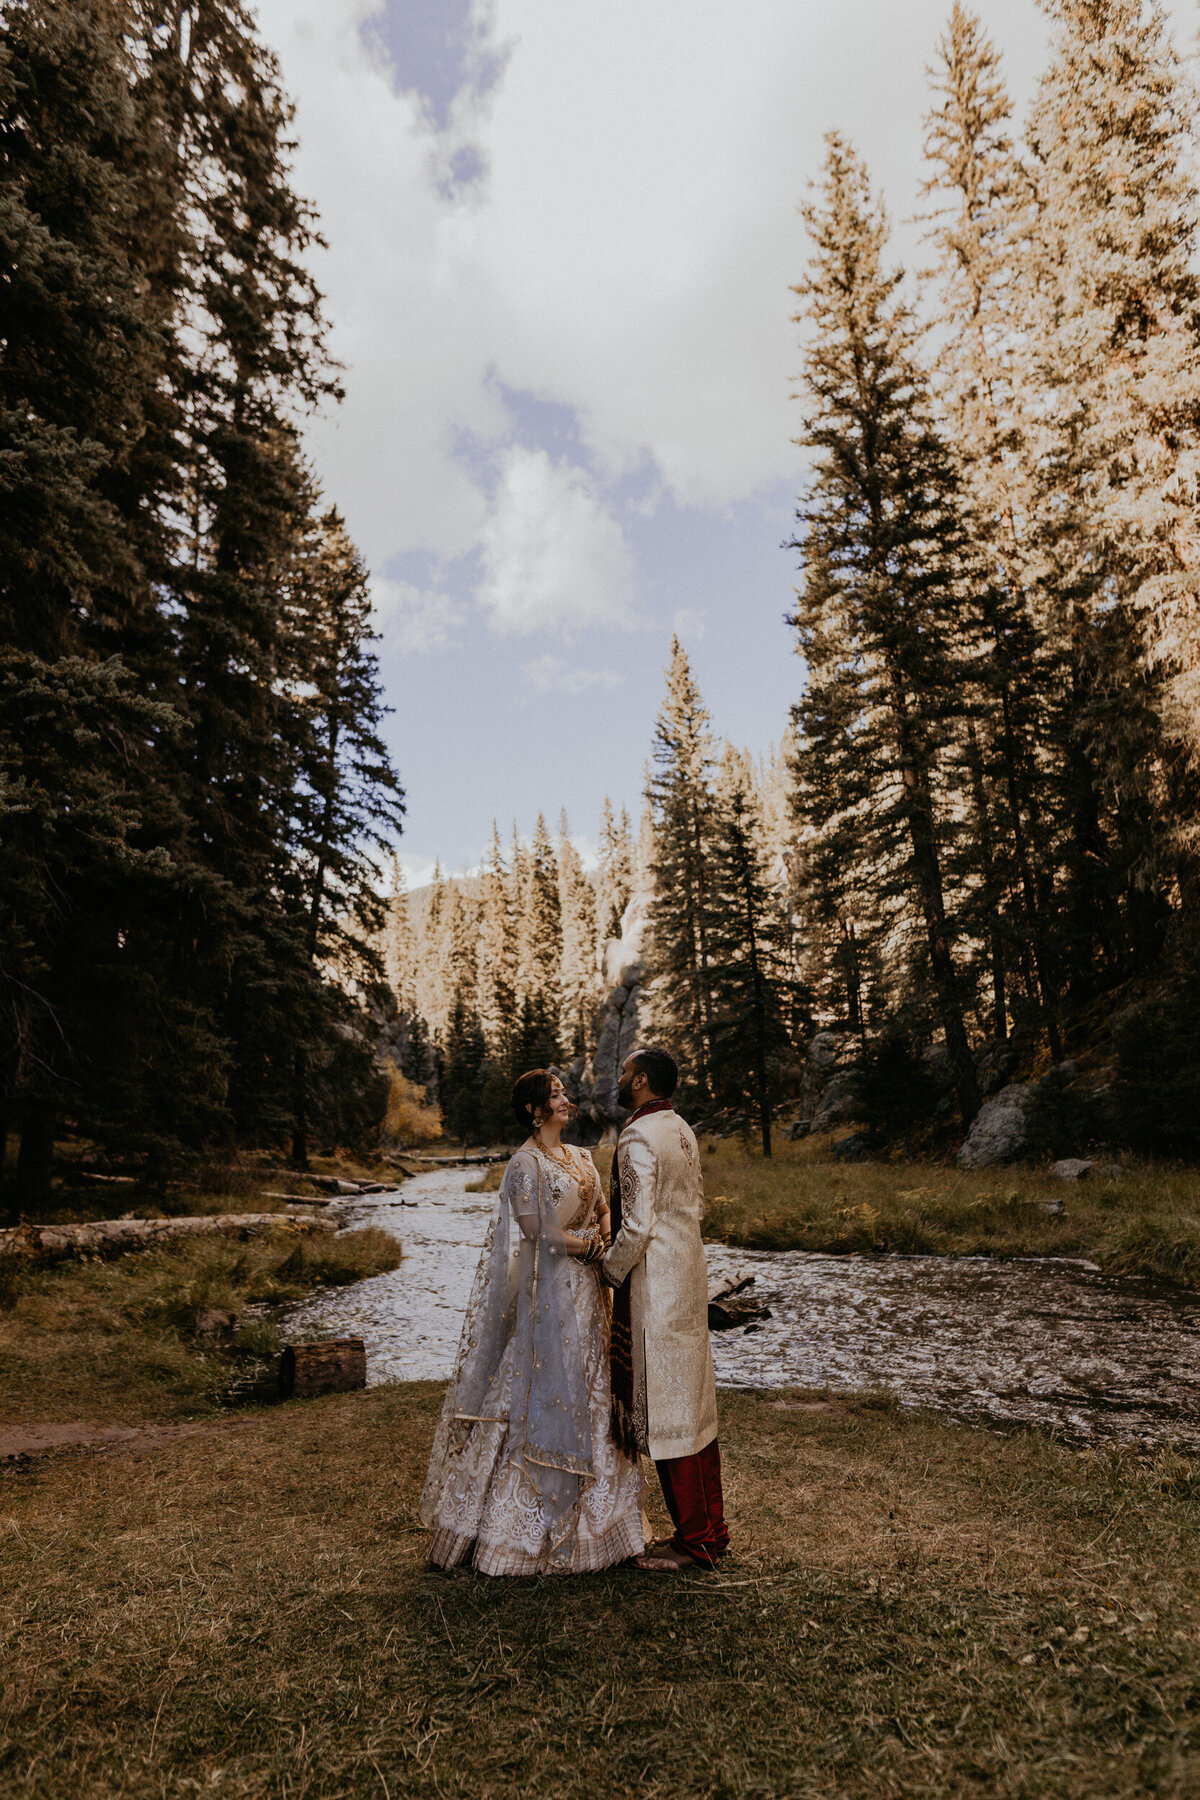 bride and groom in Indian attire holding each other in front of a creek in NM